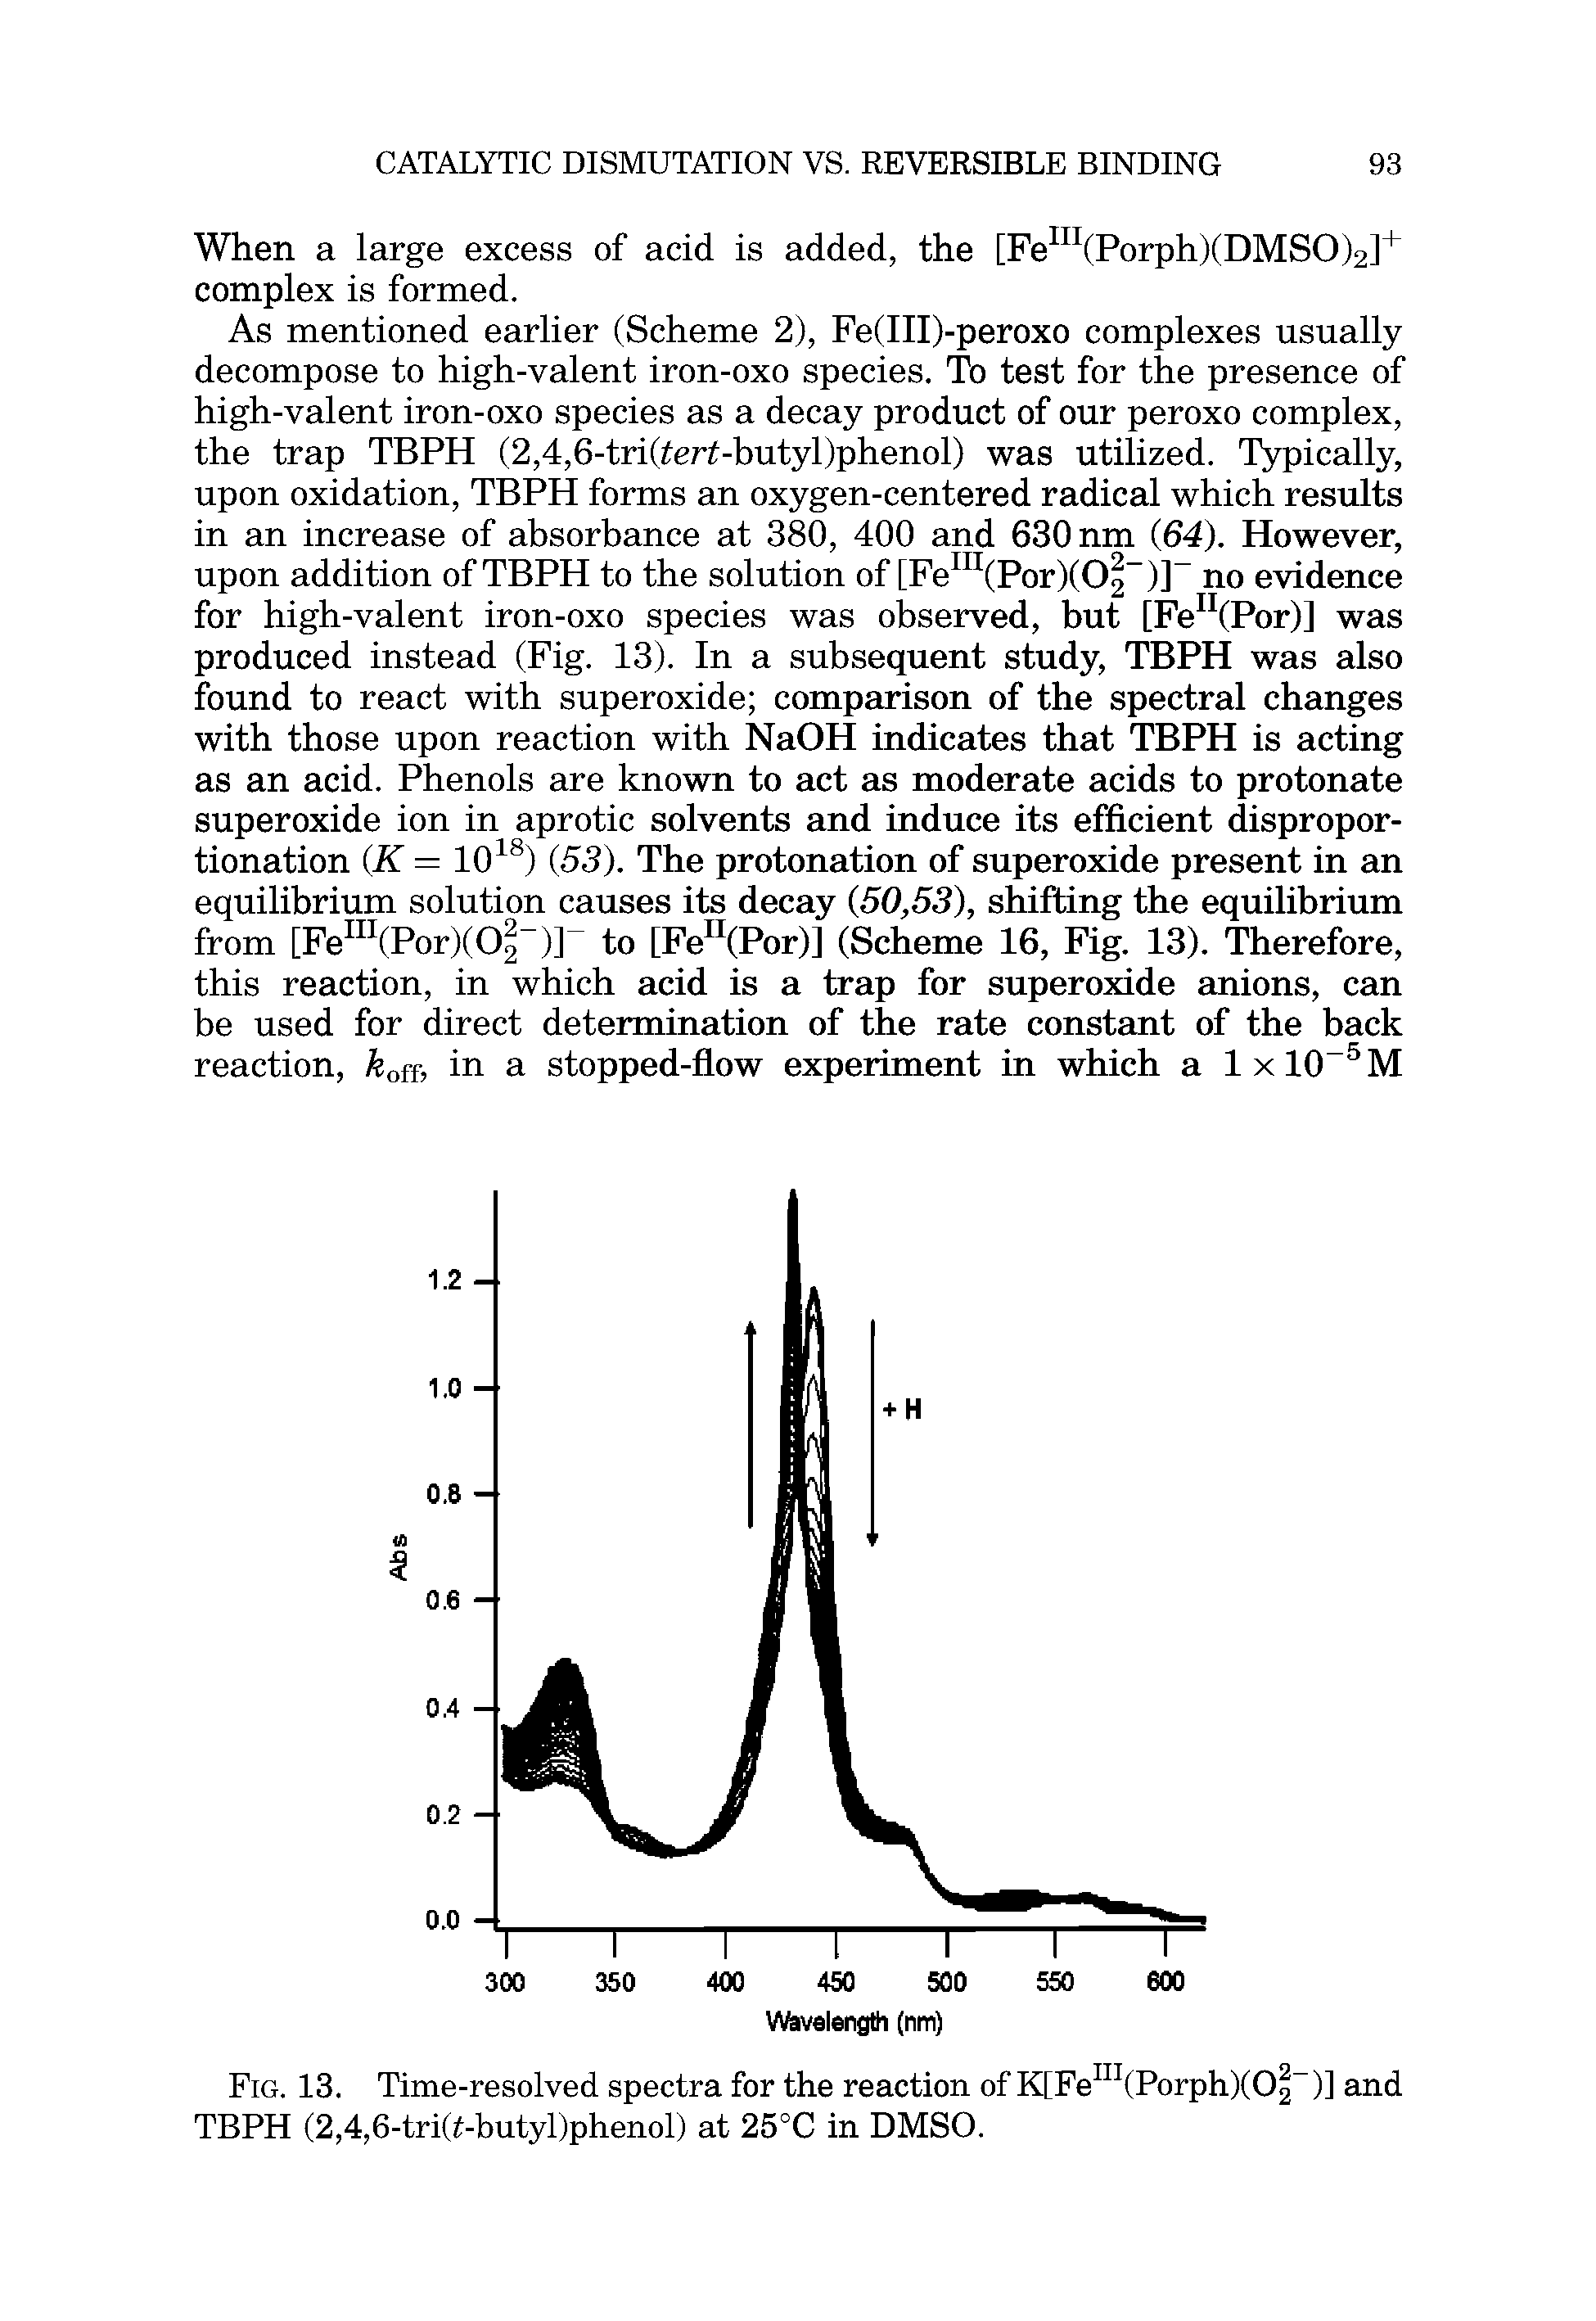 Fig. 13. Time-resolved spectra for the reaction of K[Fe (Porph)(02 )] and TBPH (2,4,6-tri( -butyl)phenol) at 25°C in DMSO.